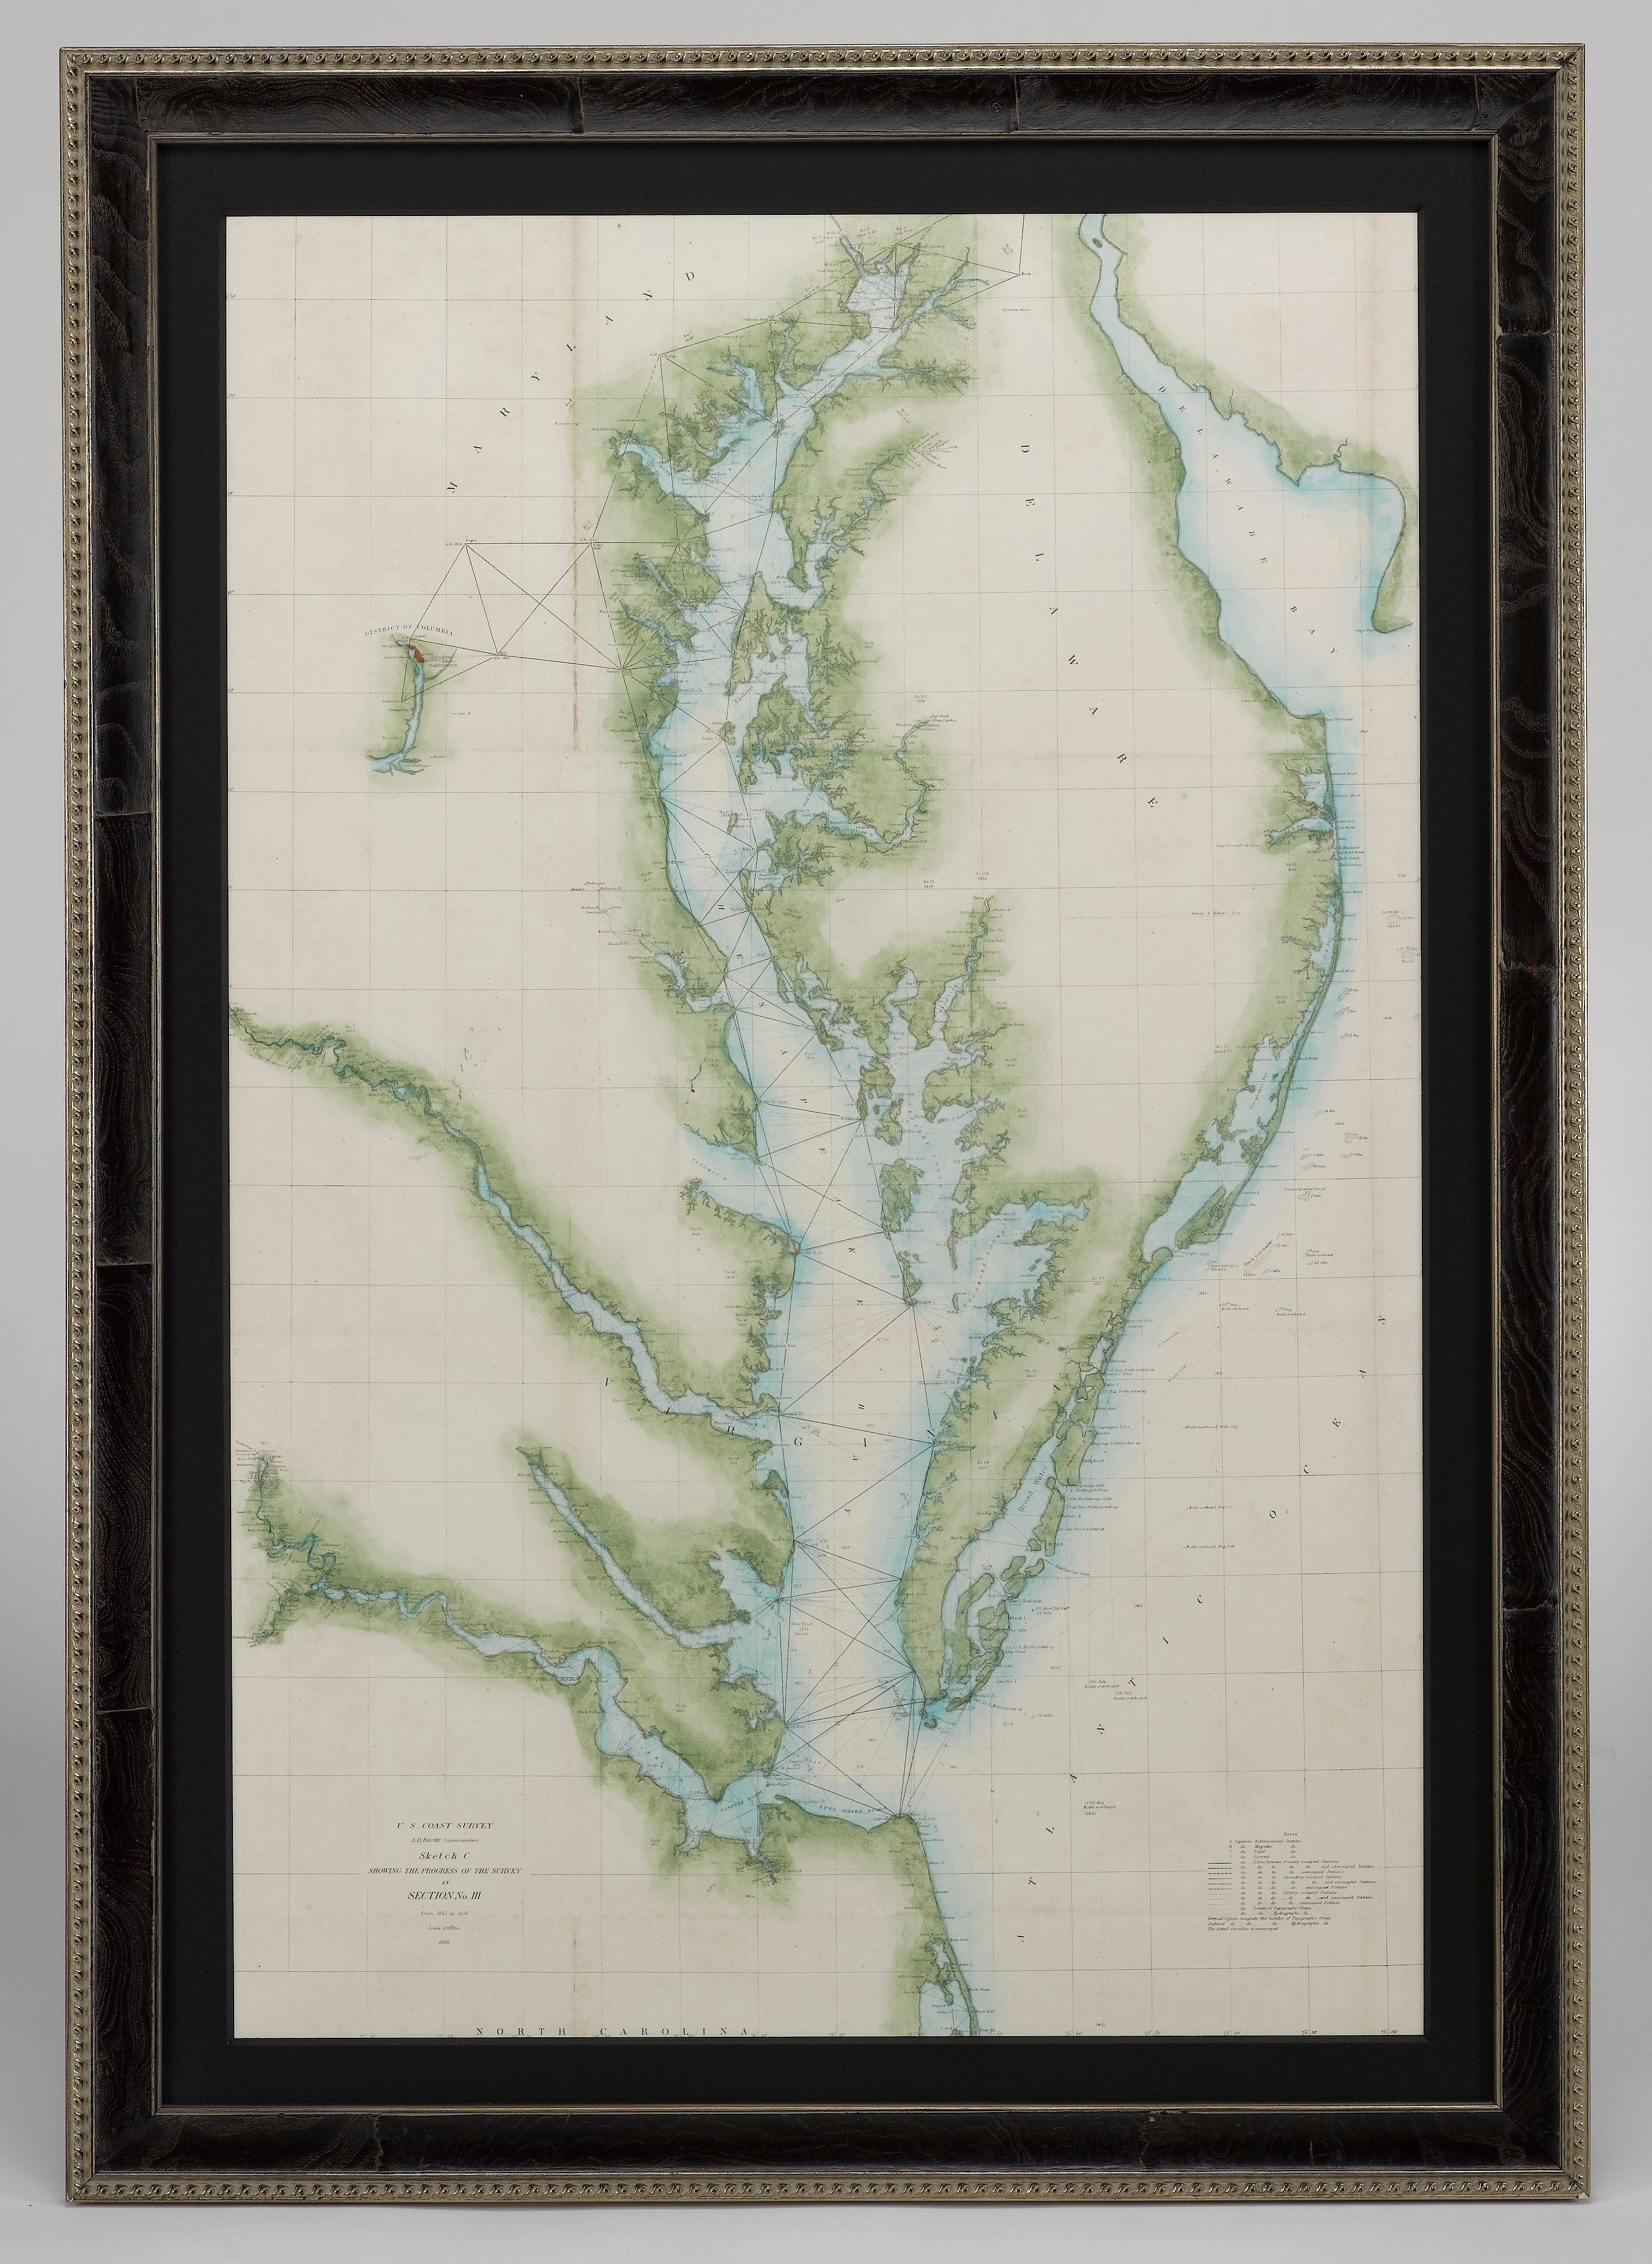 Paper 1856 U.S. Coast Survey Map of Chesapeake Bay and Delaware Bay For Sale